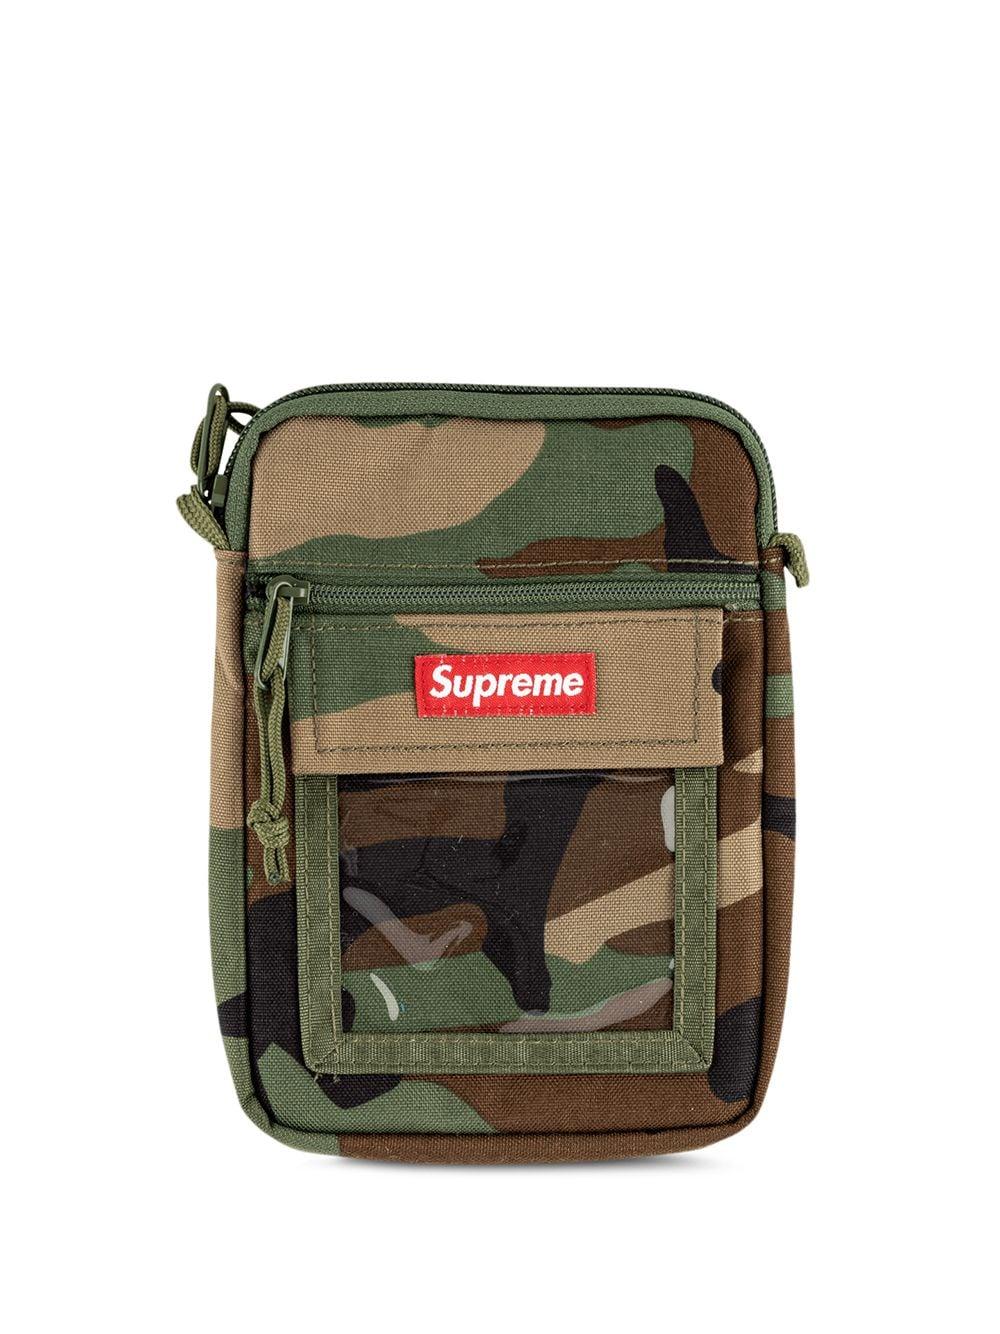 Supreme Utility Pouch 'ss 19' in Woodland Camo (Green) for Men - Lyst